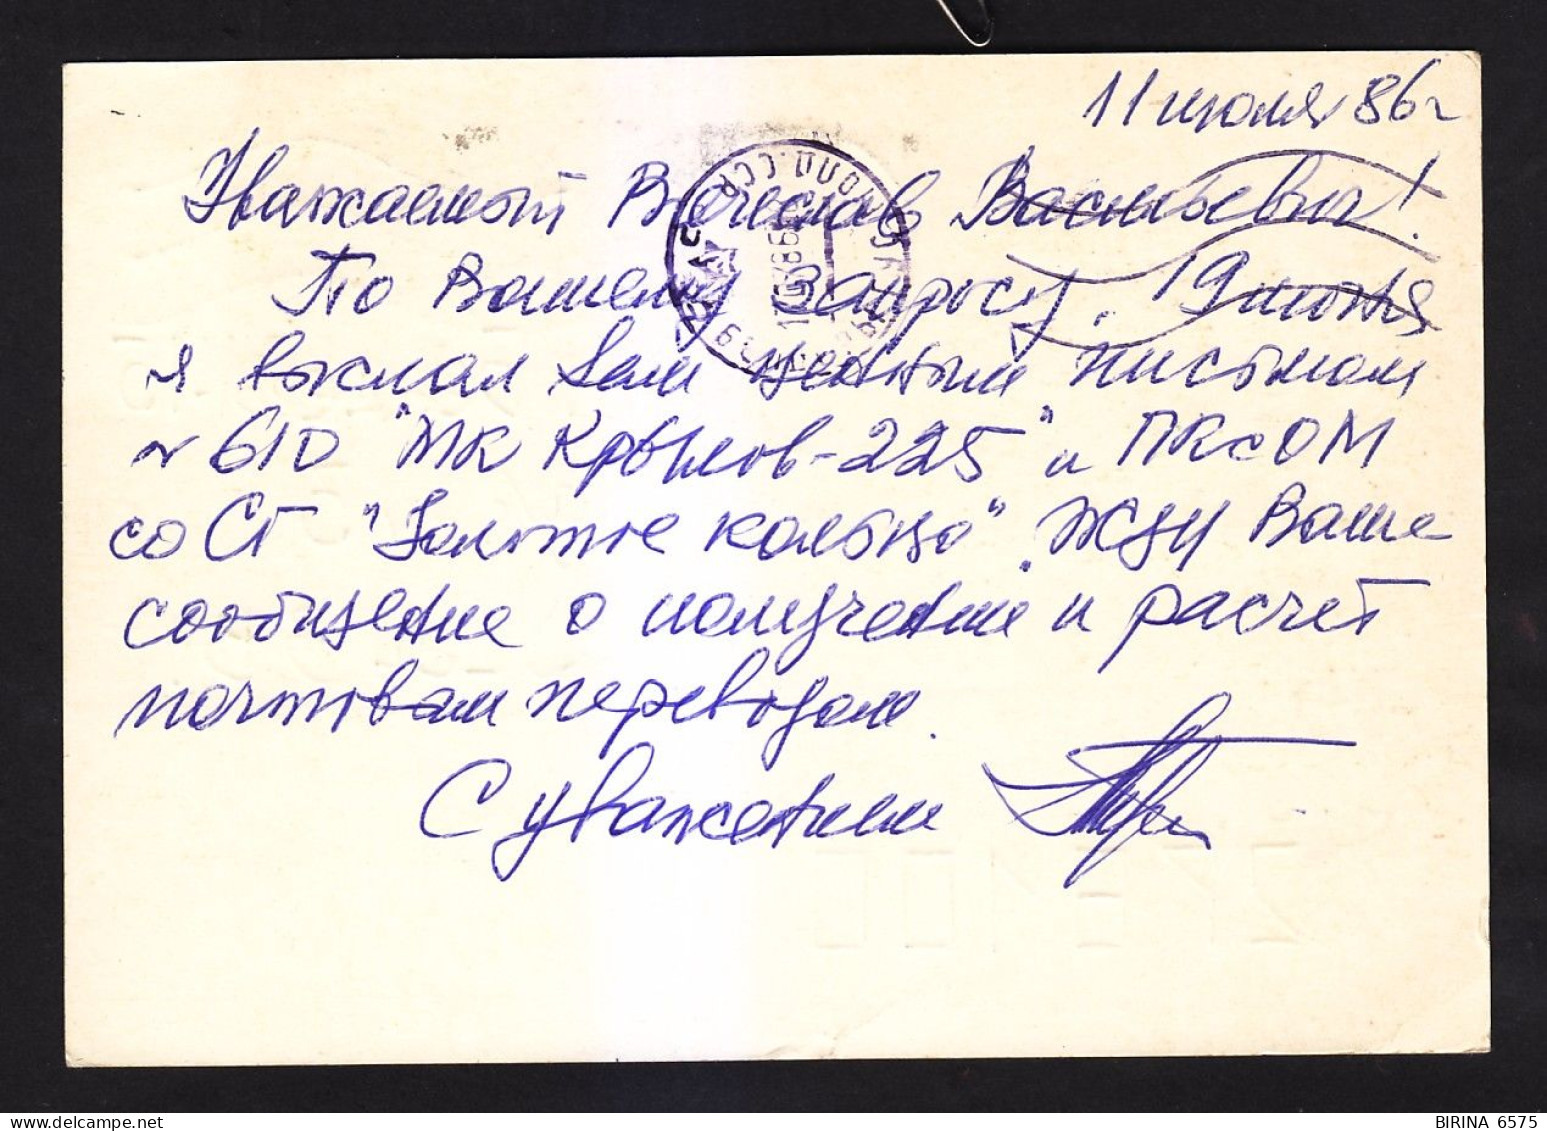 A POSTCARD. The USSR. PEOPLE'S ARTIST OF N. A. OBUKHOVA. Mail. - 9-48 - Lettres & Documents